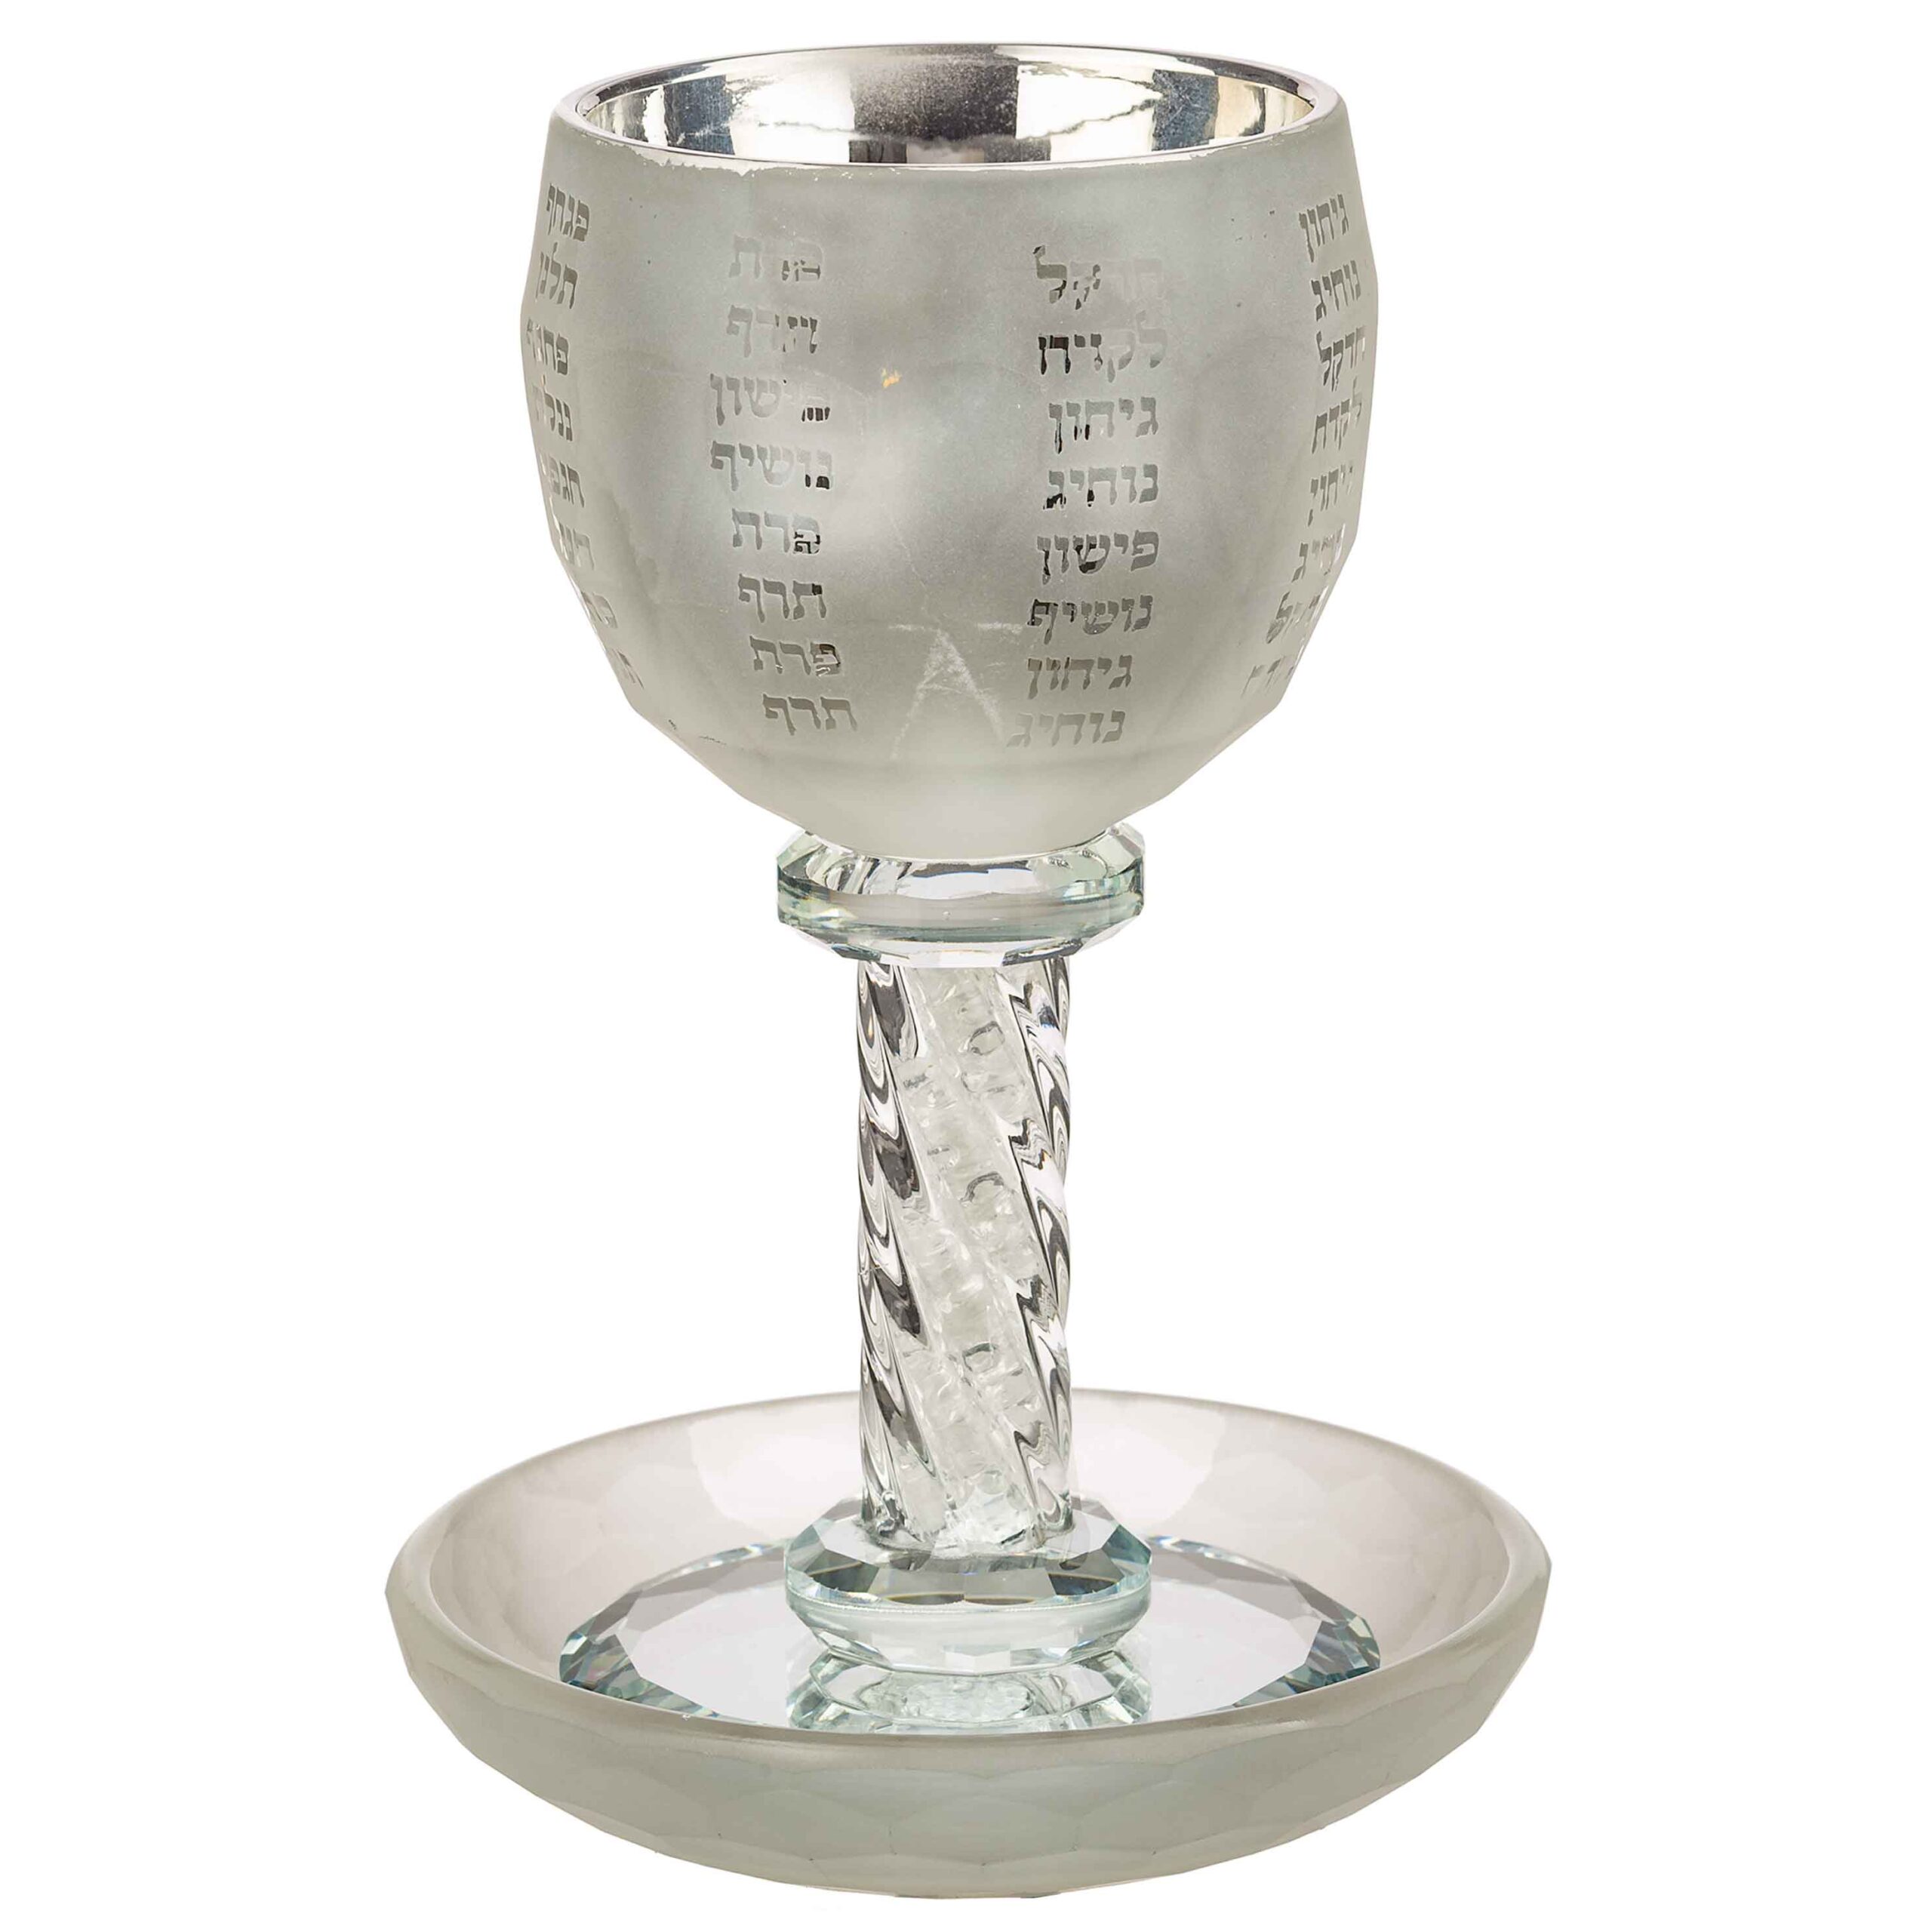 Crystal Kiddush Cup "The Bible Rivers" 16 cm contain 100ml / 3.4oz